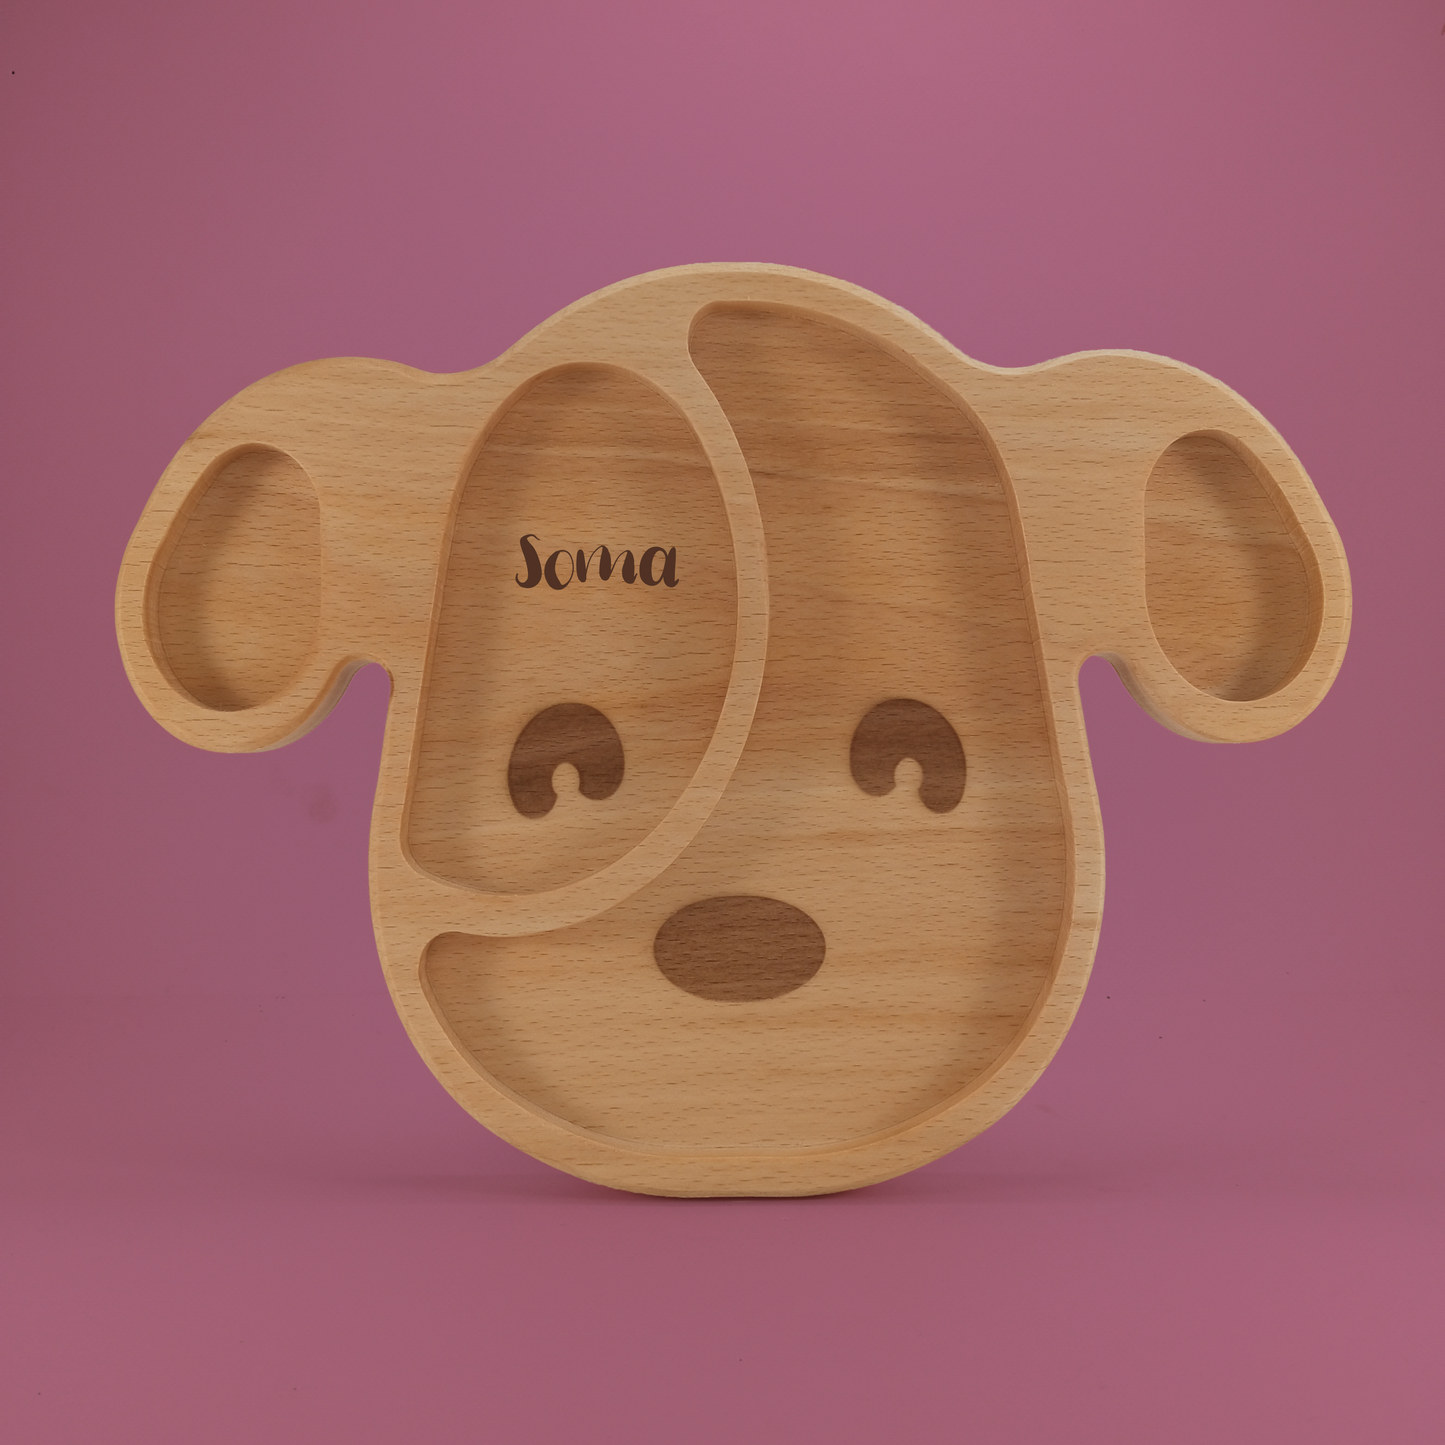 Puppy shaped wooden plate to BLW feeding